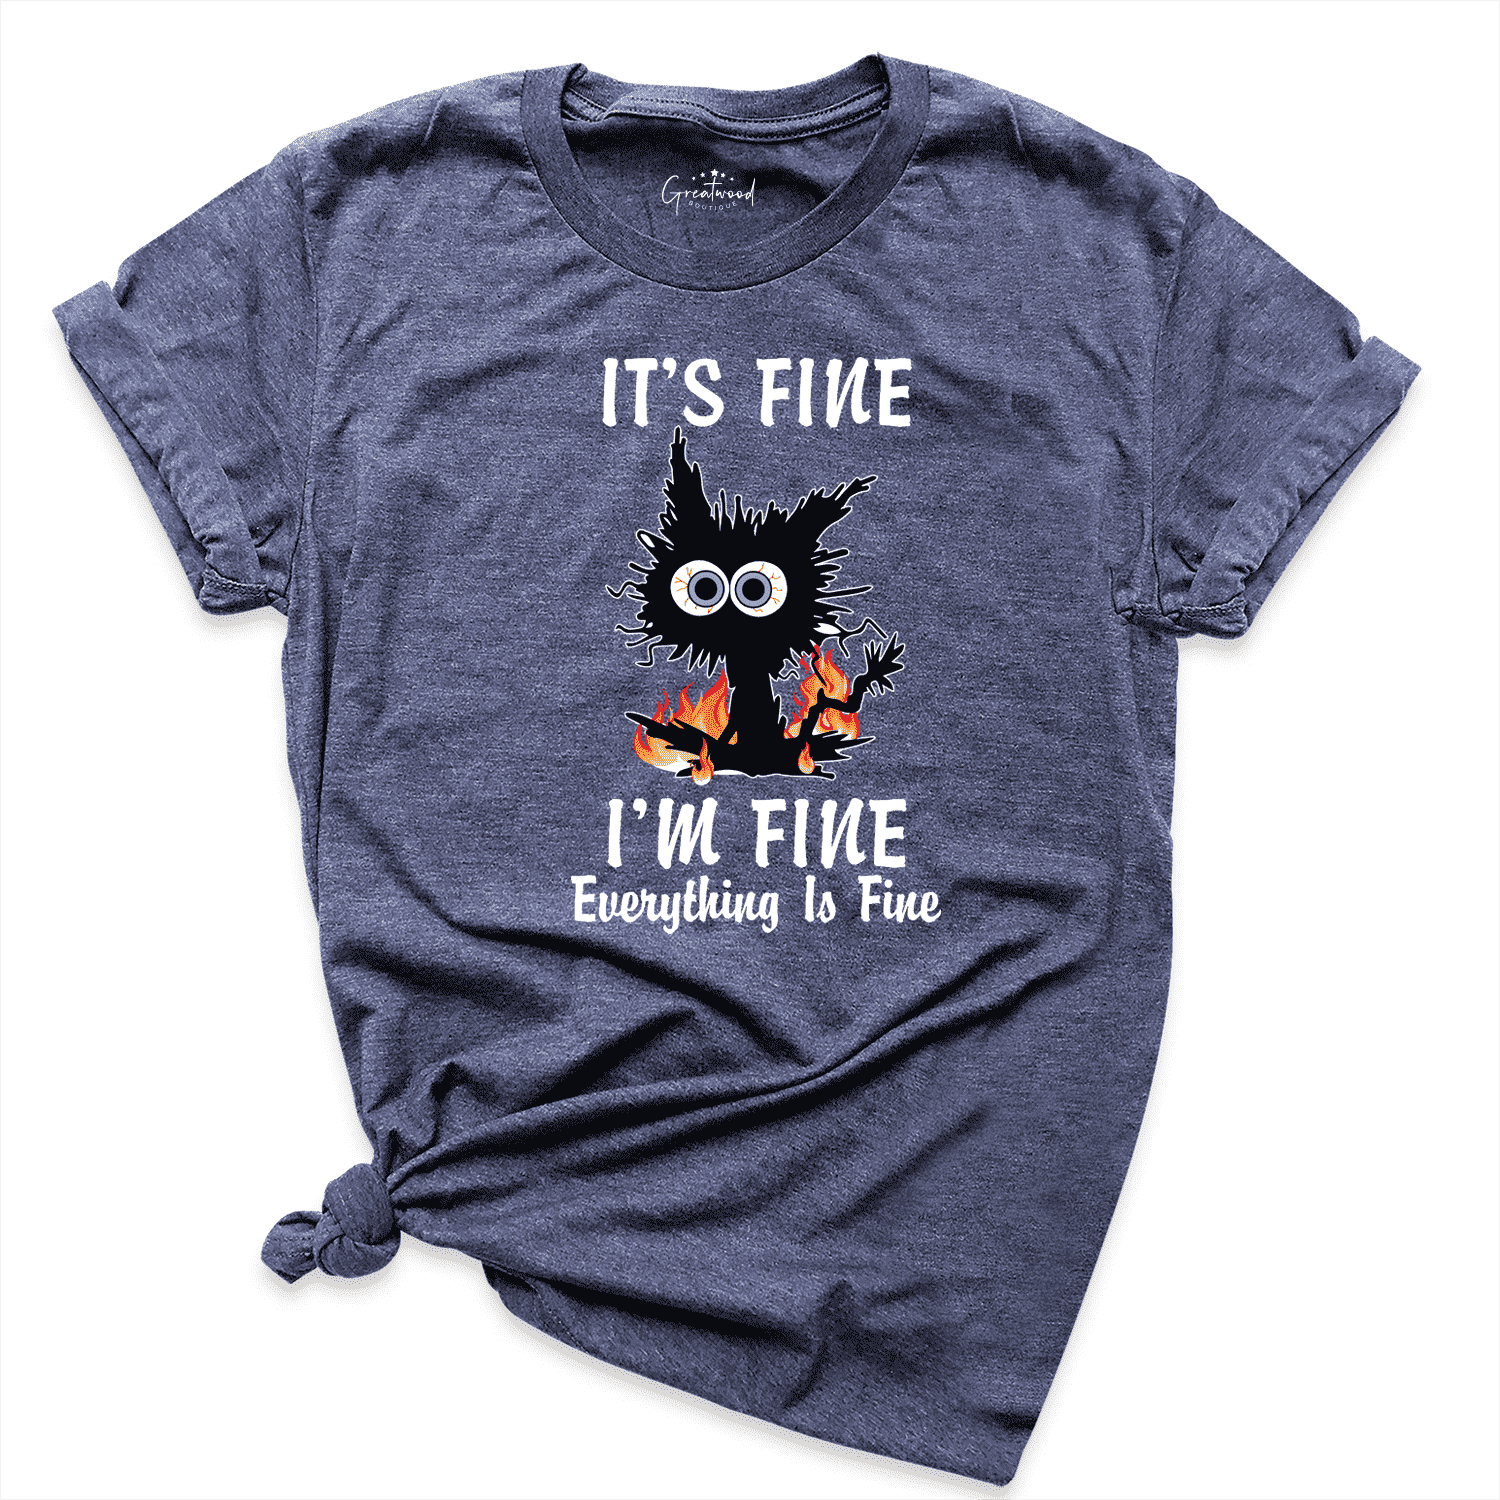 It’s Fine I’m Fine Everything Is Fine Shirt Navy - Greatwood Boutique